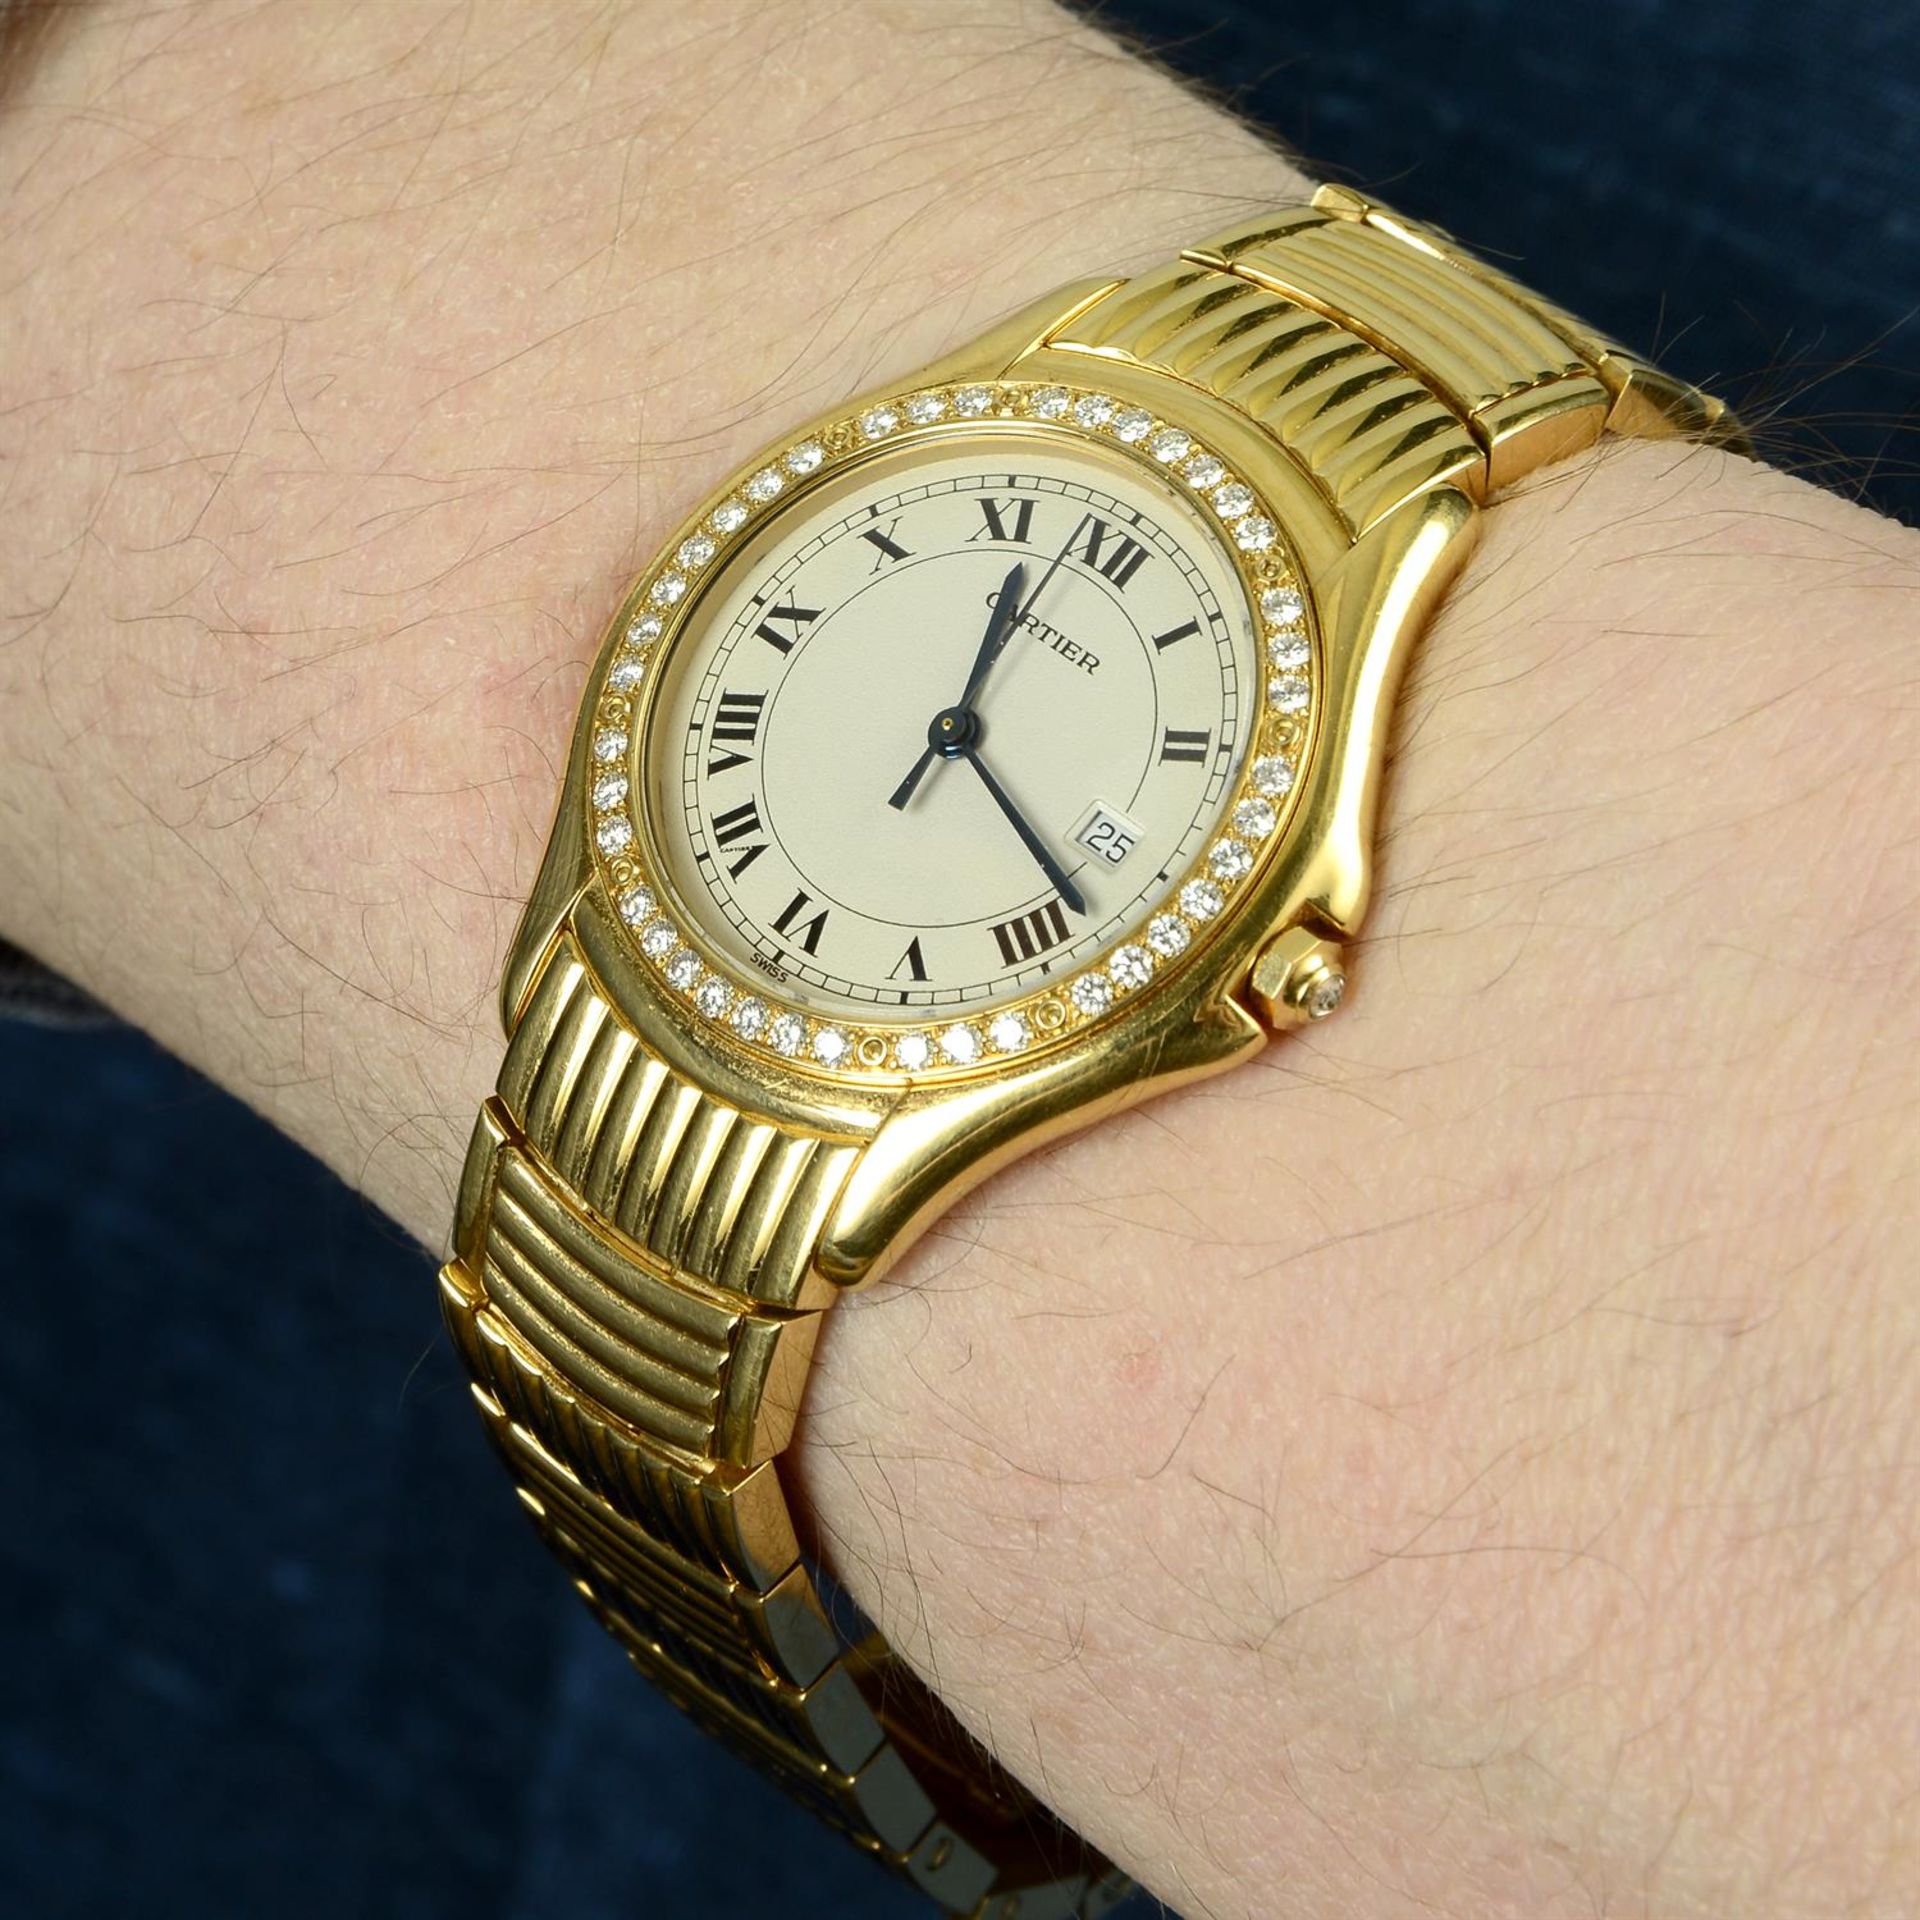 CARTIER - an 18ct yellow gold Cougar bracelet watch, 33mm. - Image 5 of 5